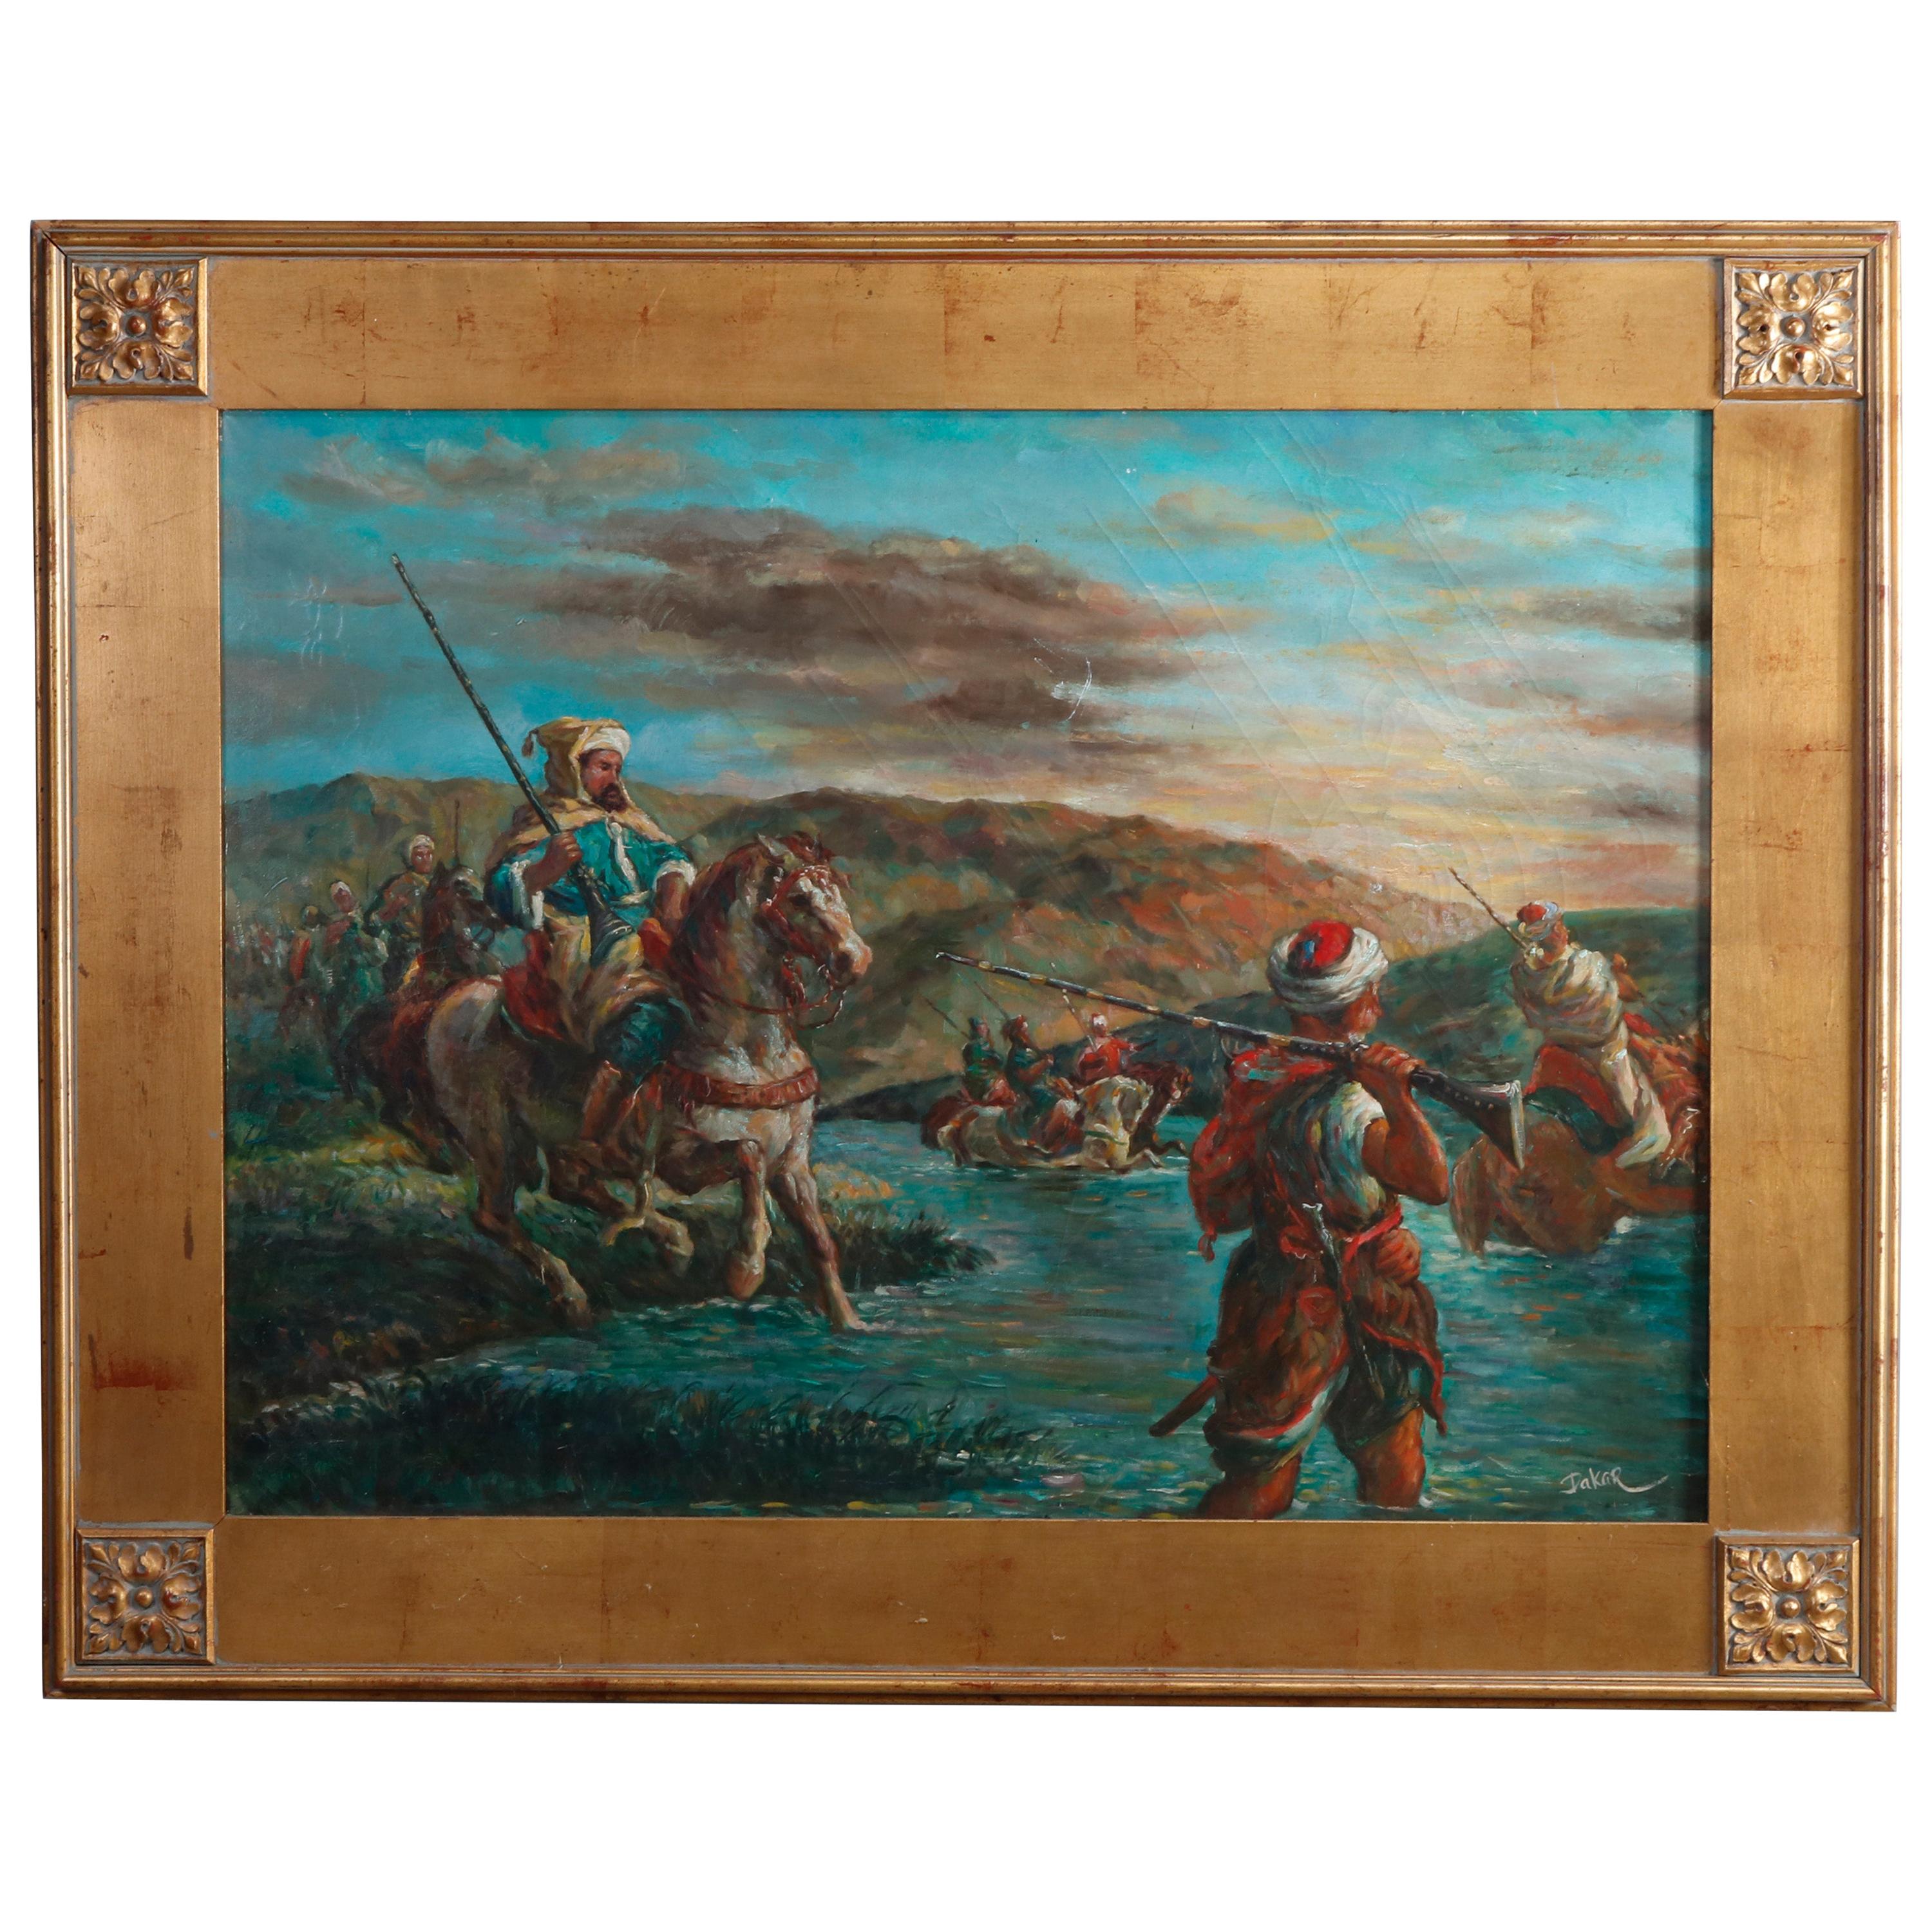 Antique Oversized Oil Painting, Russian Soldiers on Horseback, by Dakar, 20th C